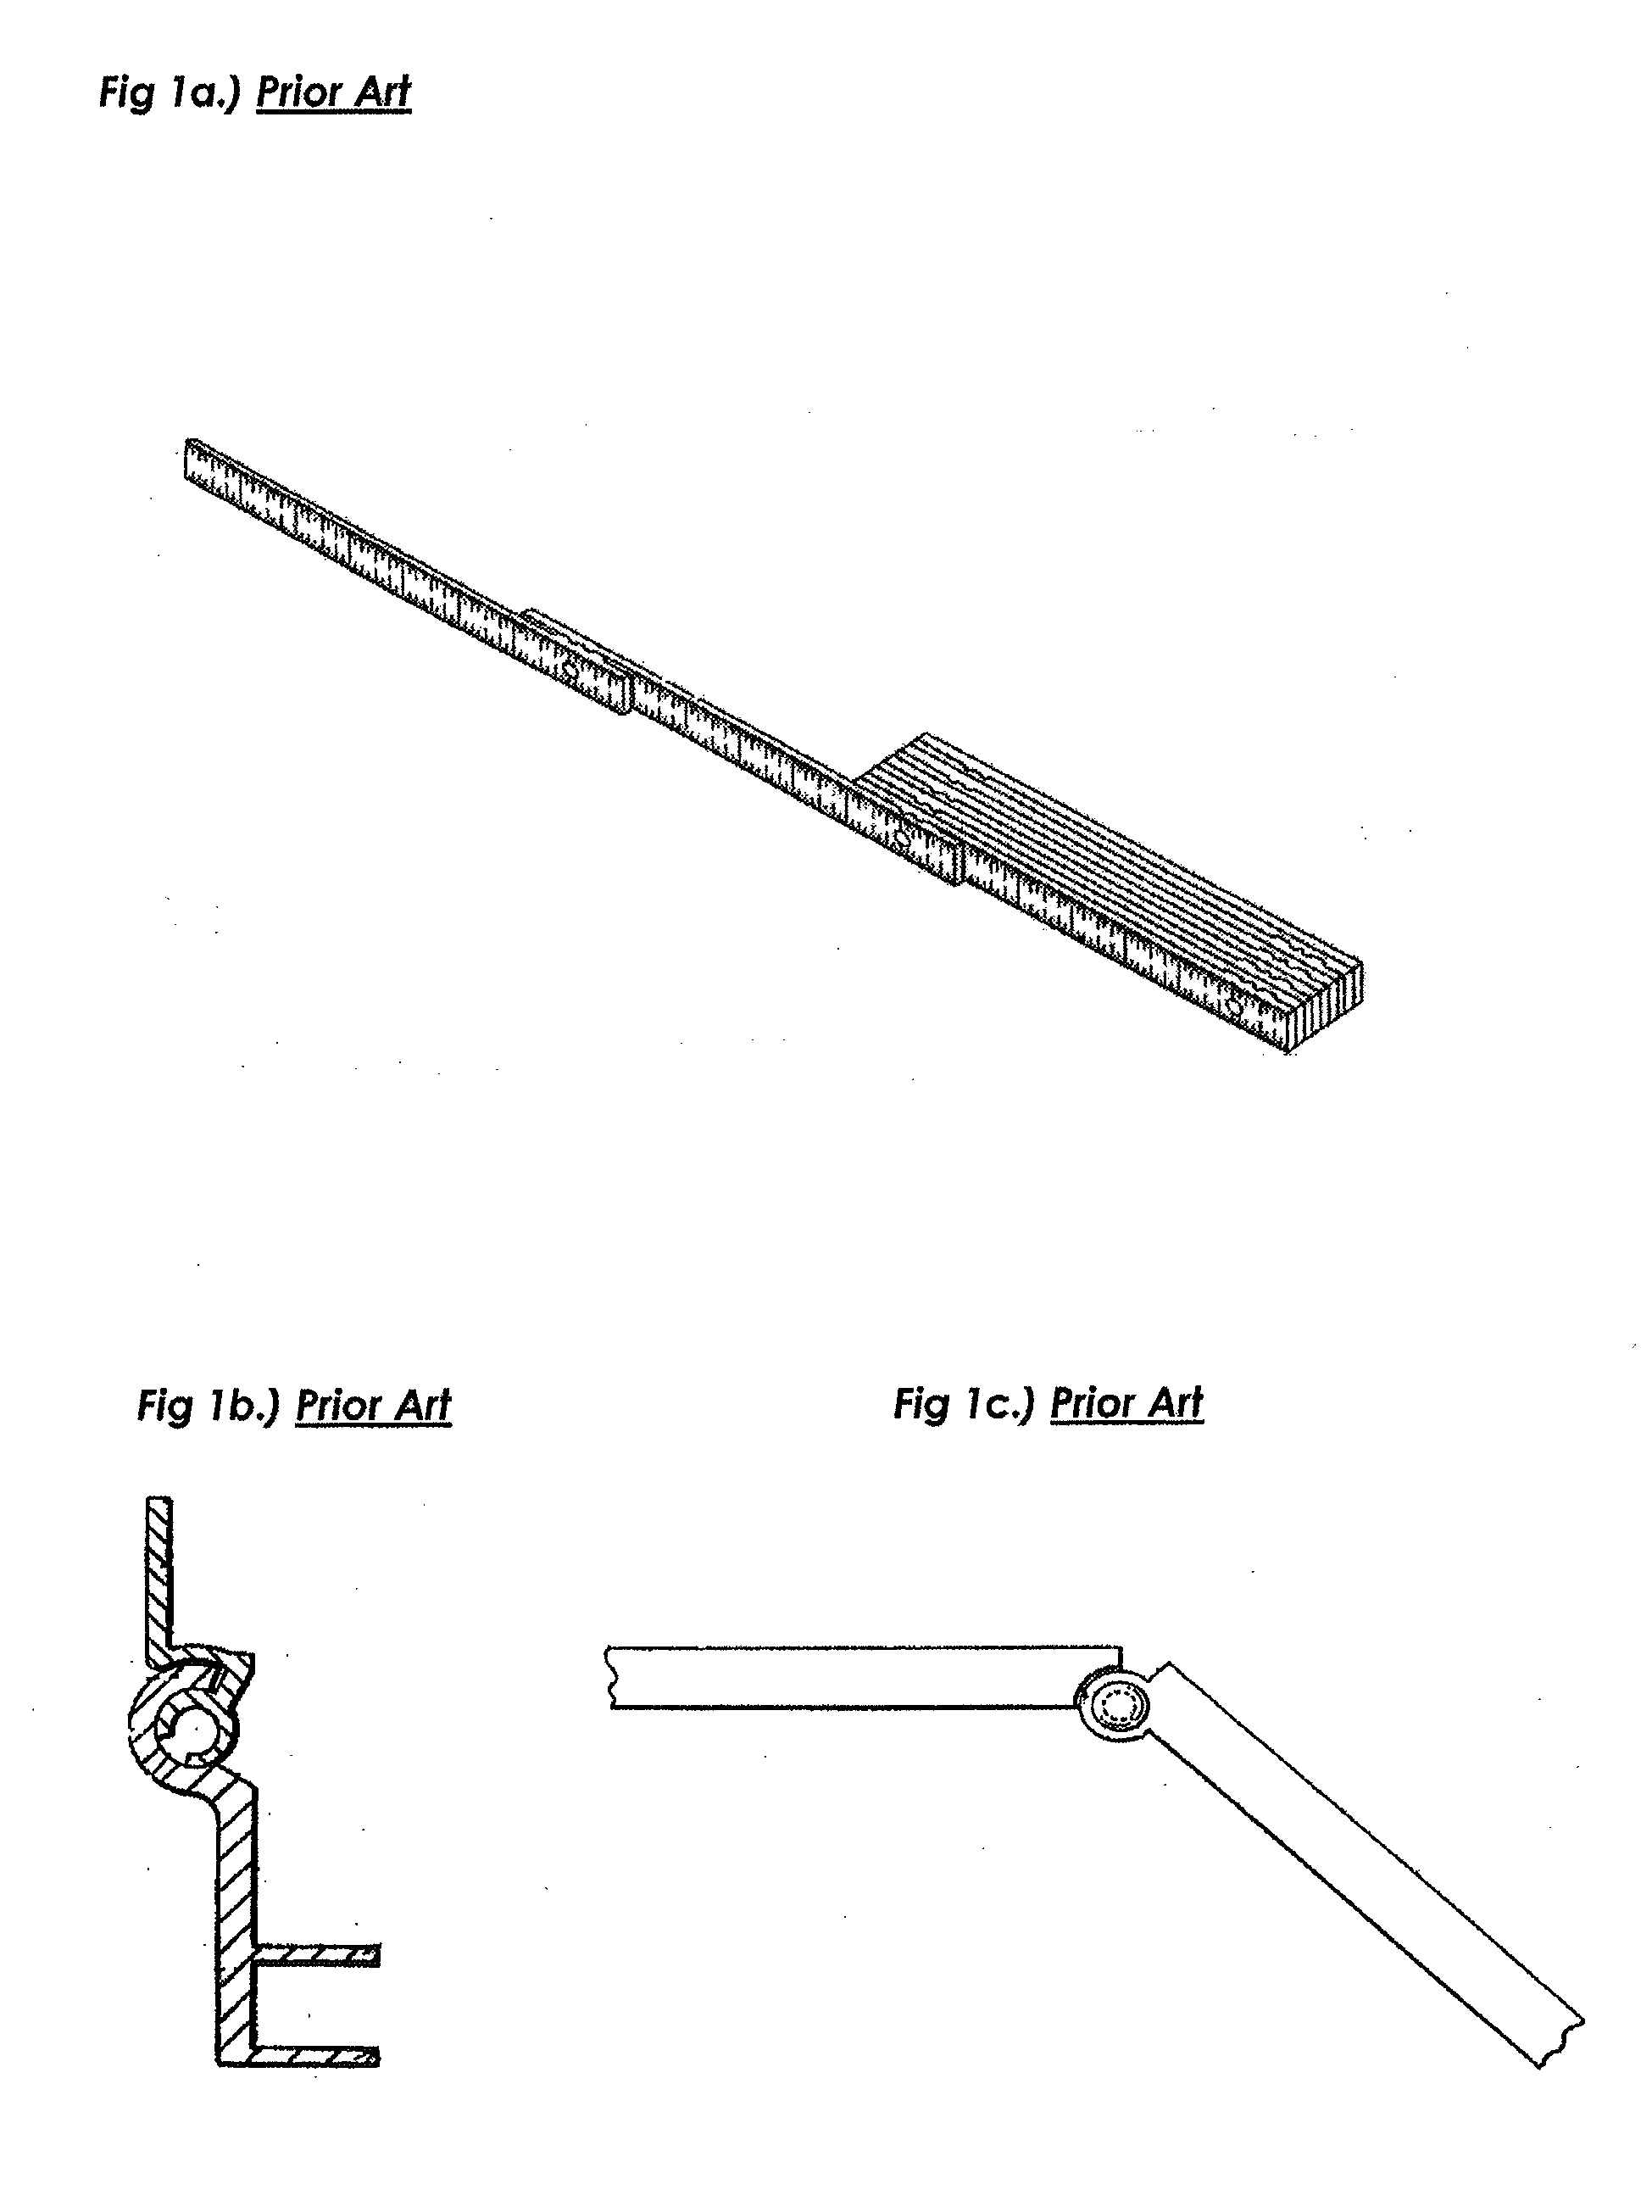 Joint and foldable structures employing the same